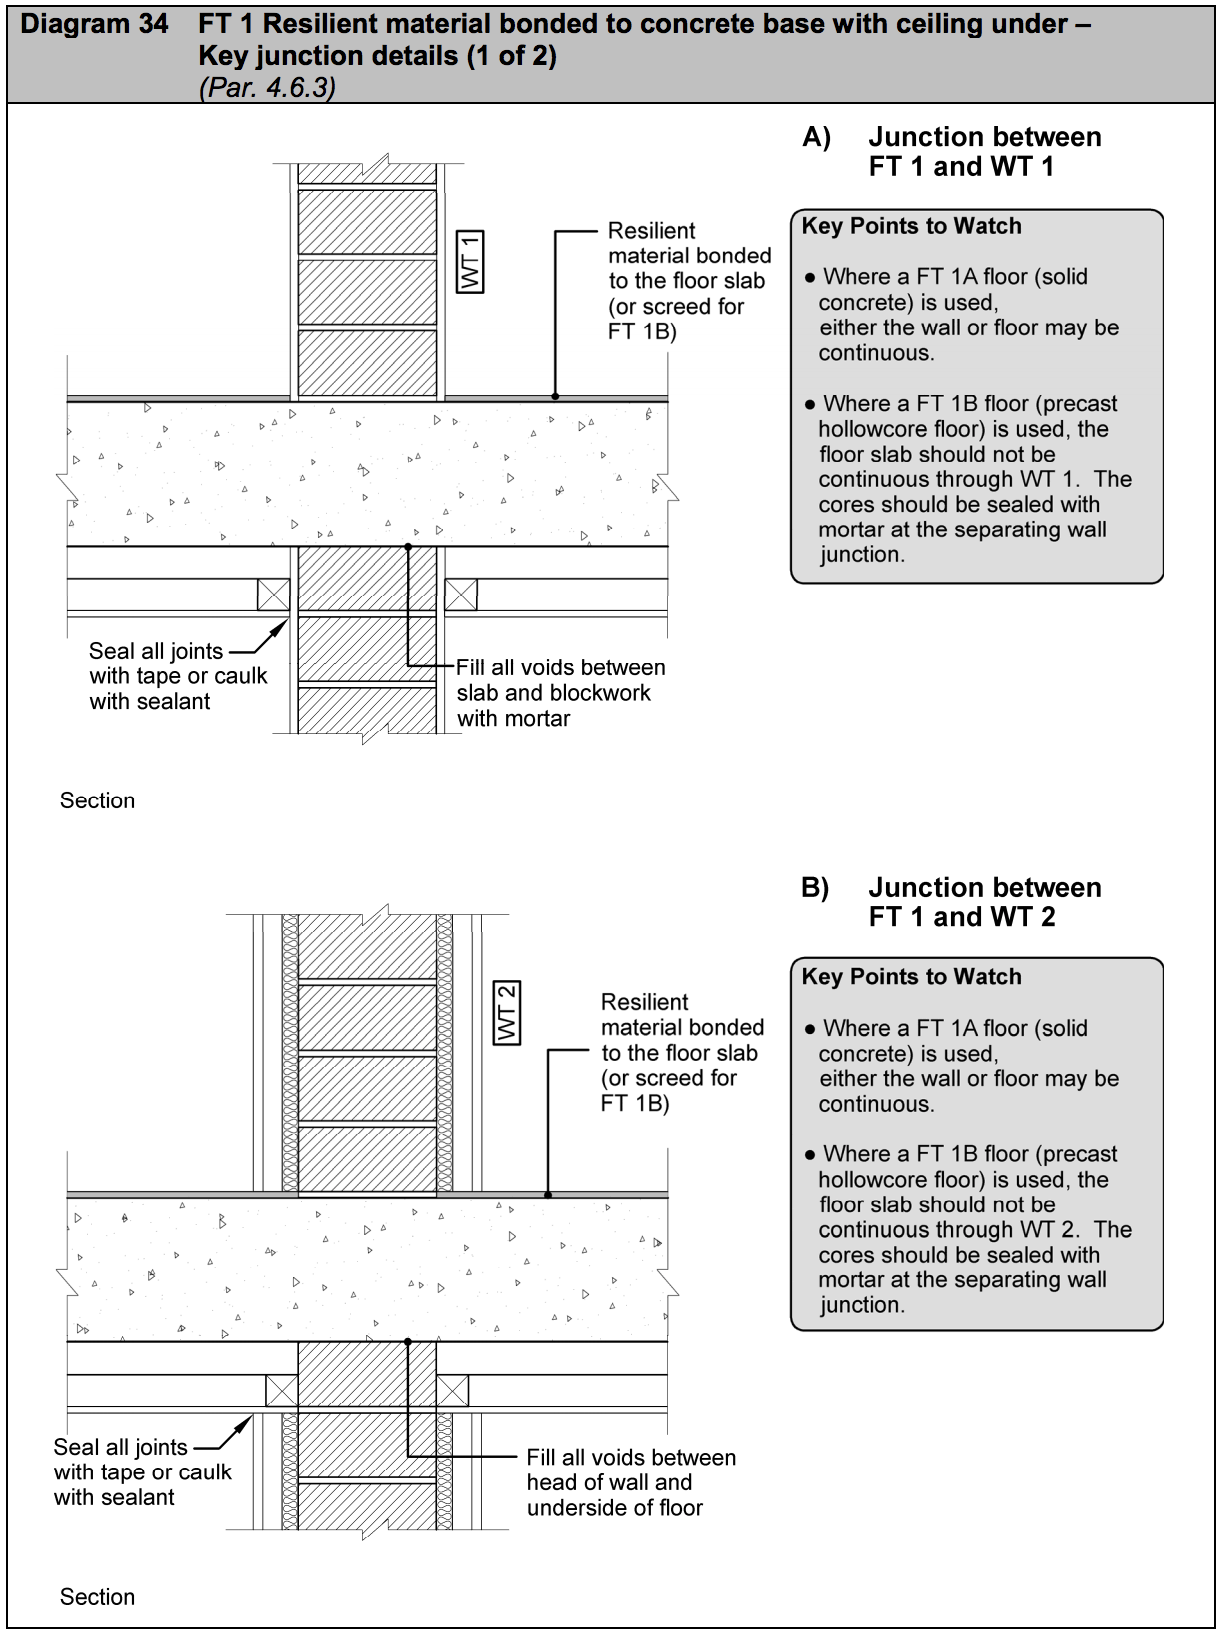 Diagram HE34 - FT 1 Resilient material bonded to concrete base with ceiling under - key junction details (1 of 2) - Extract from TGD E